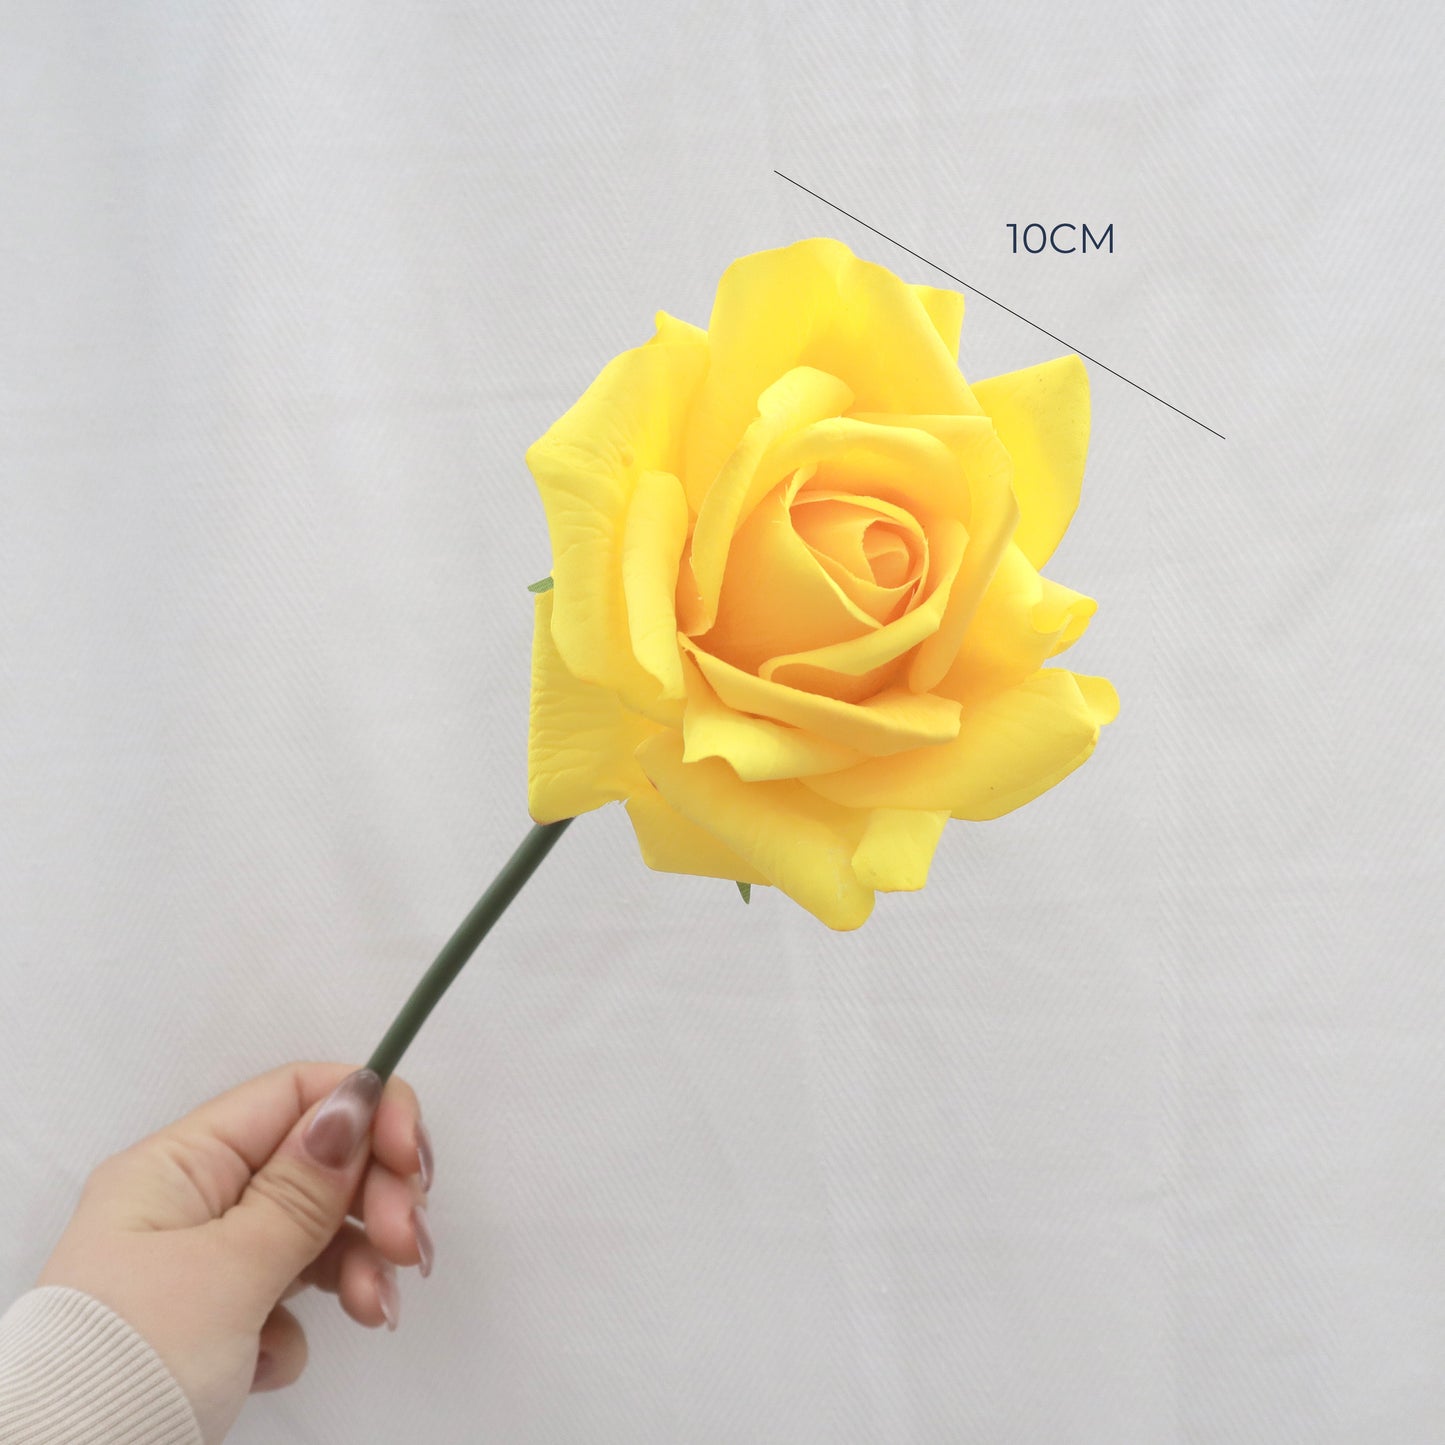 Artificial Real Touch Rose Bundle Yellow 5 Stems